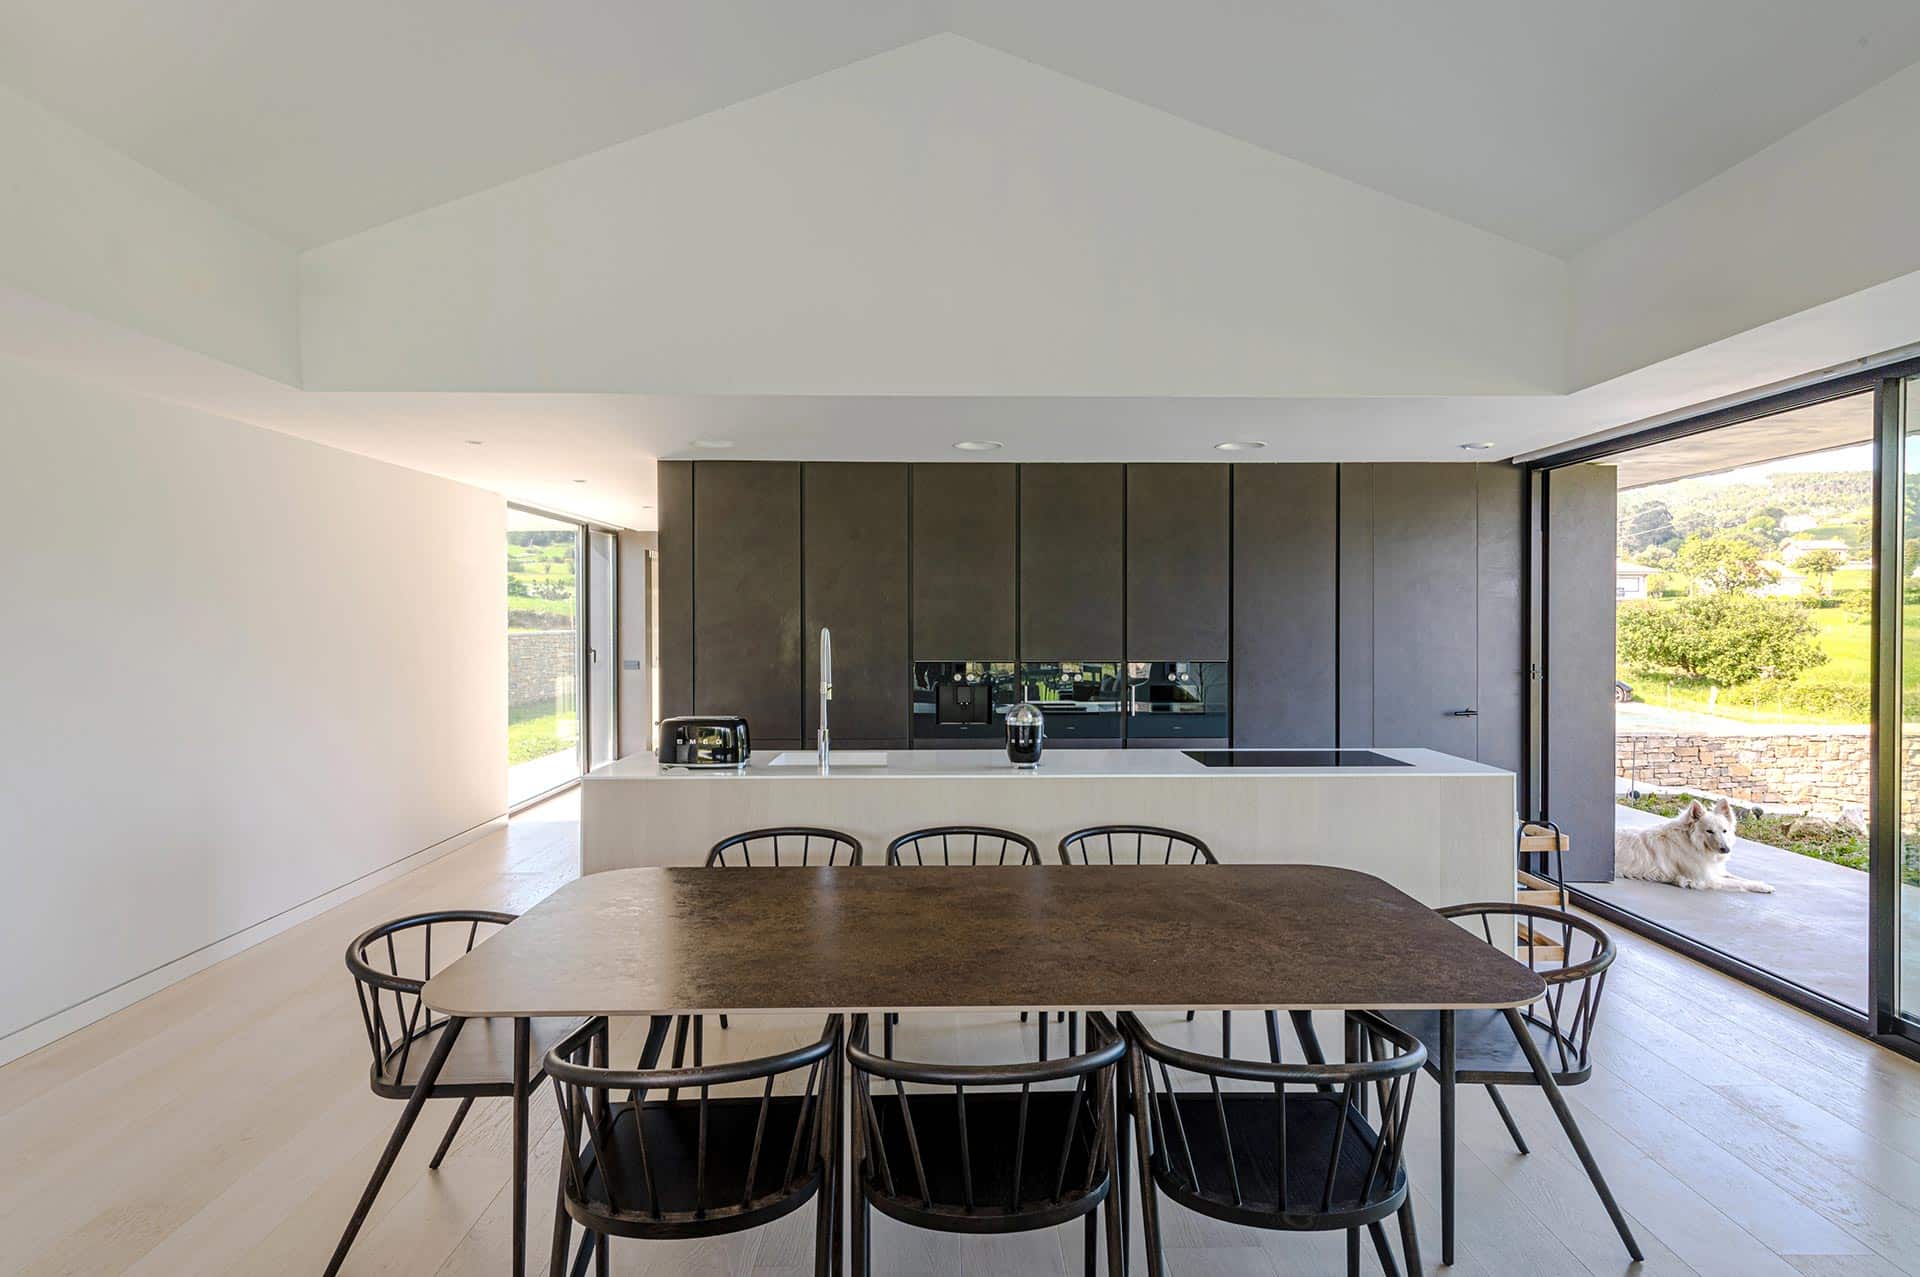 Minimal kitchen of luxury house designed by Moah Architects in Cantabria